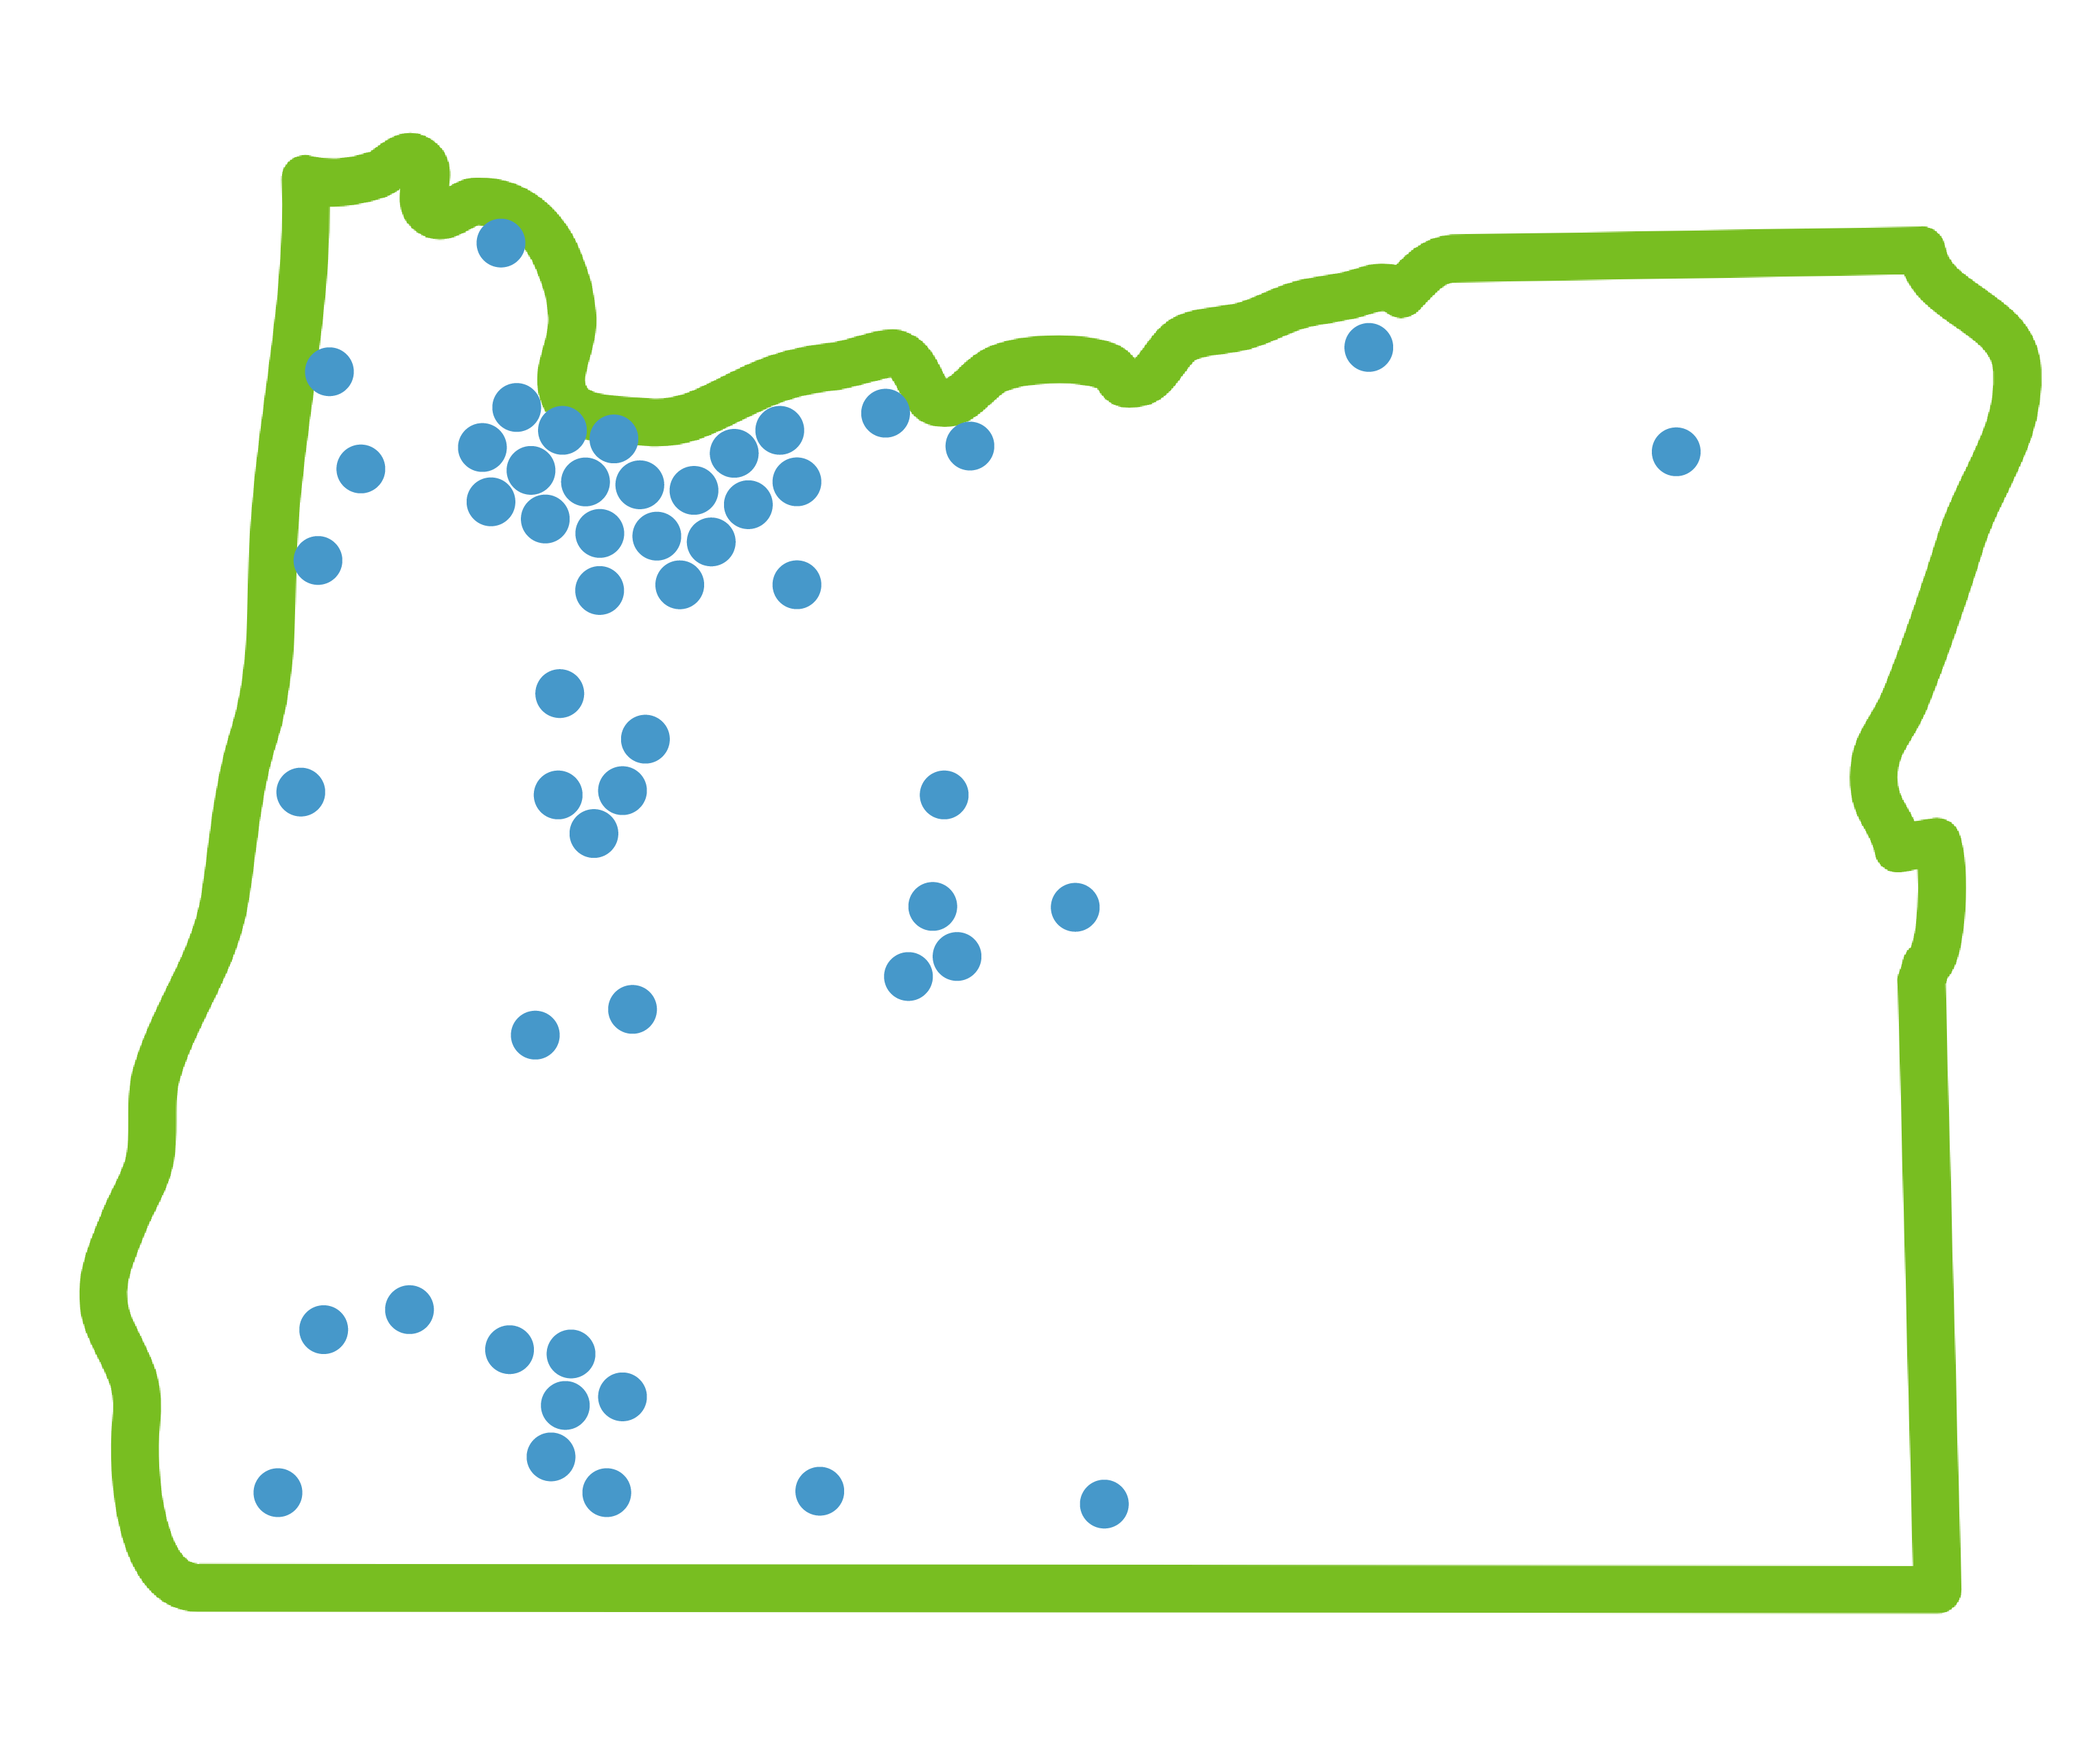 a green outline of the state of Oregon with blue dots representing locations